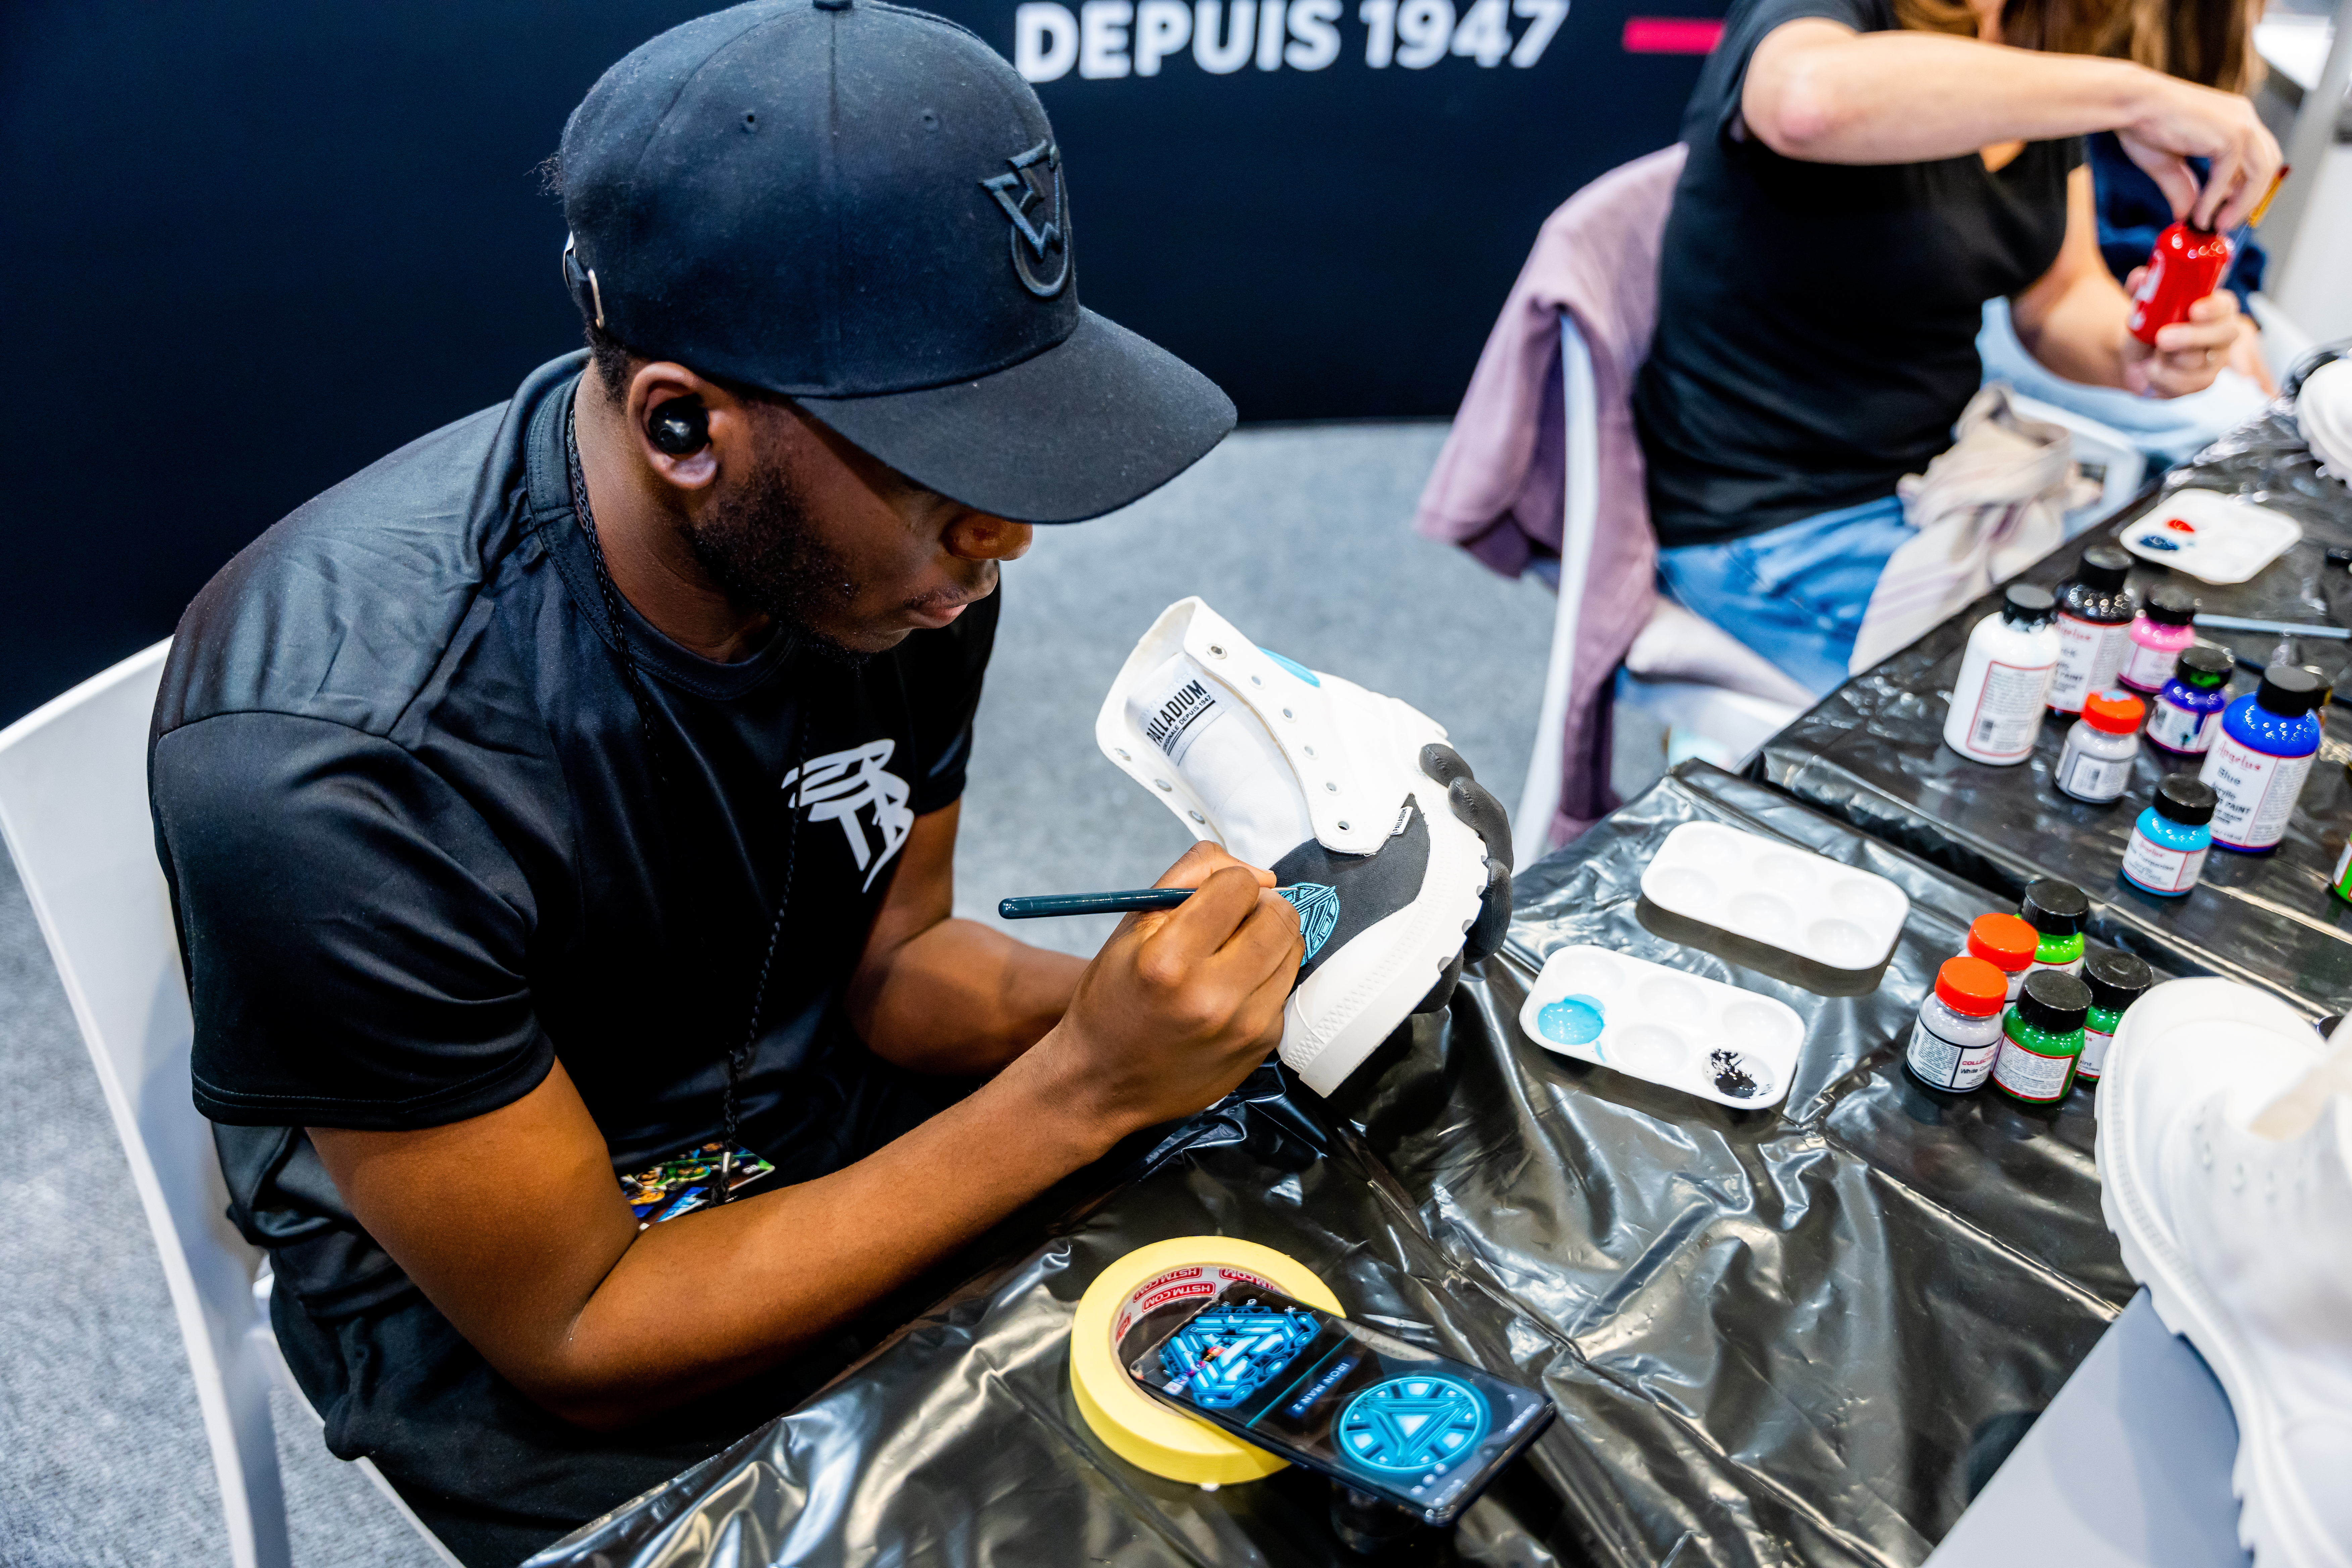 Sneaker painting at Comic Con Cape Town. Image: Matthew Sleep